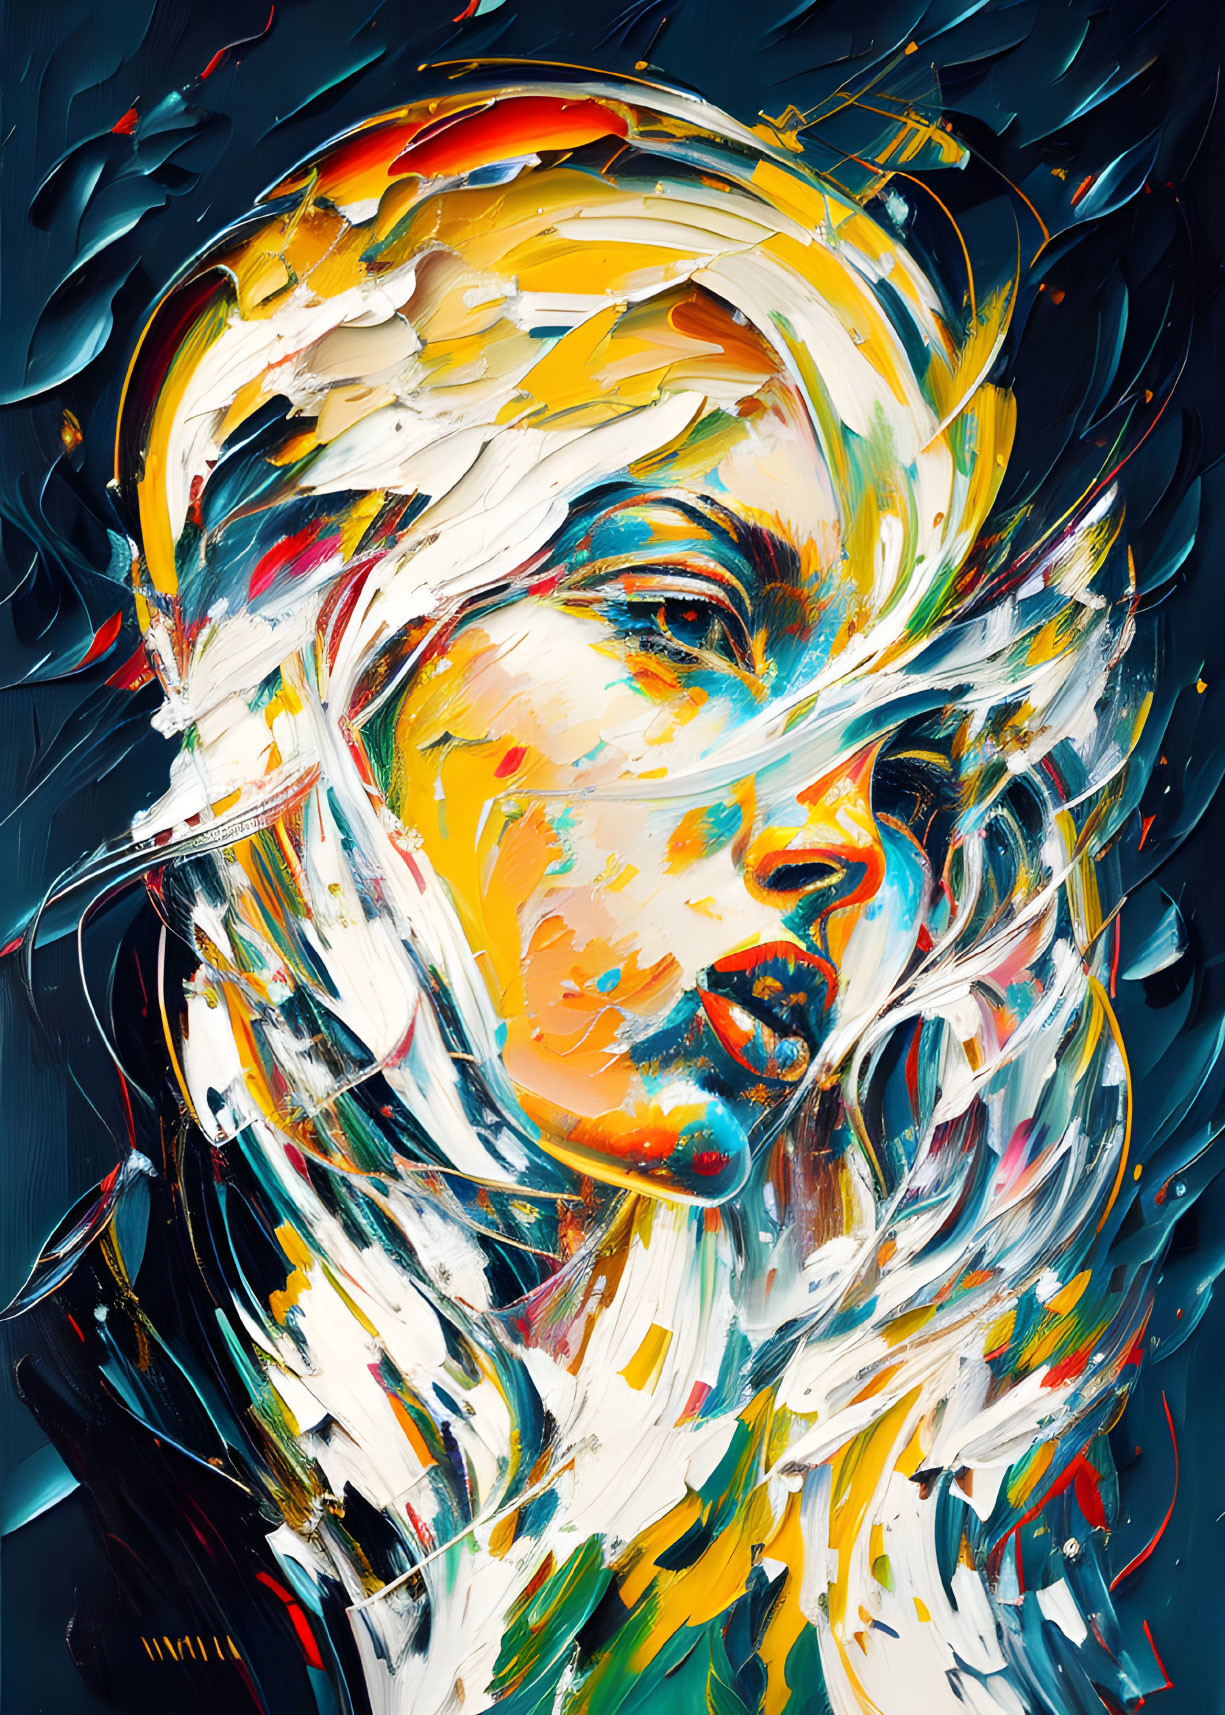 Abstract portrait of a woman with yellow, blue, and white paint streaks